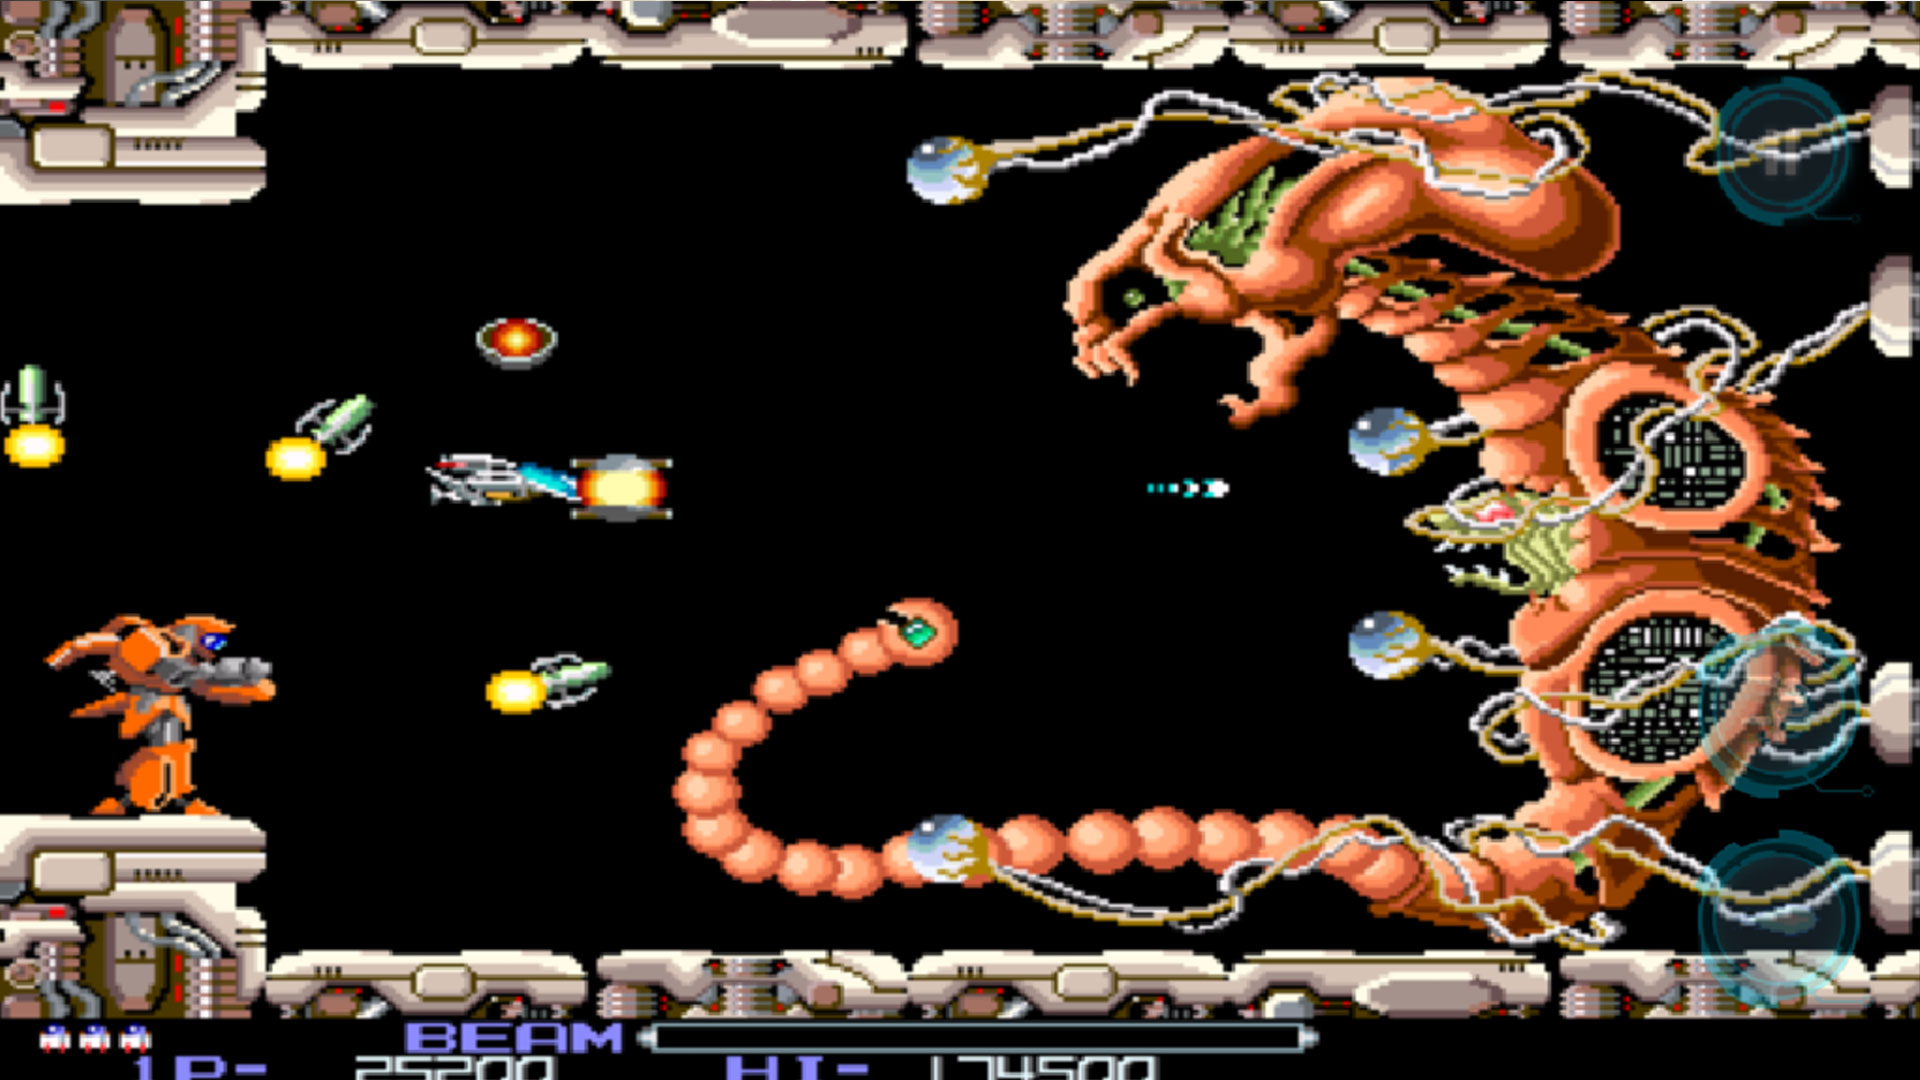 R-Type, one of our best retro games